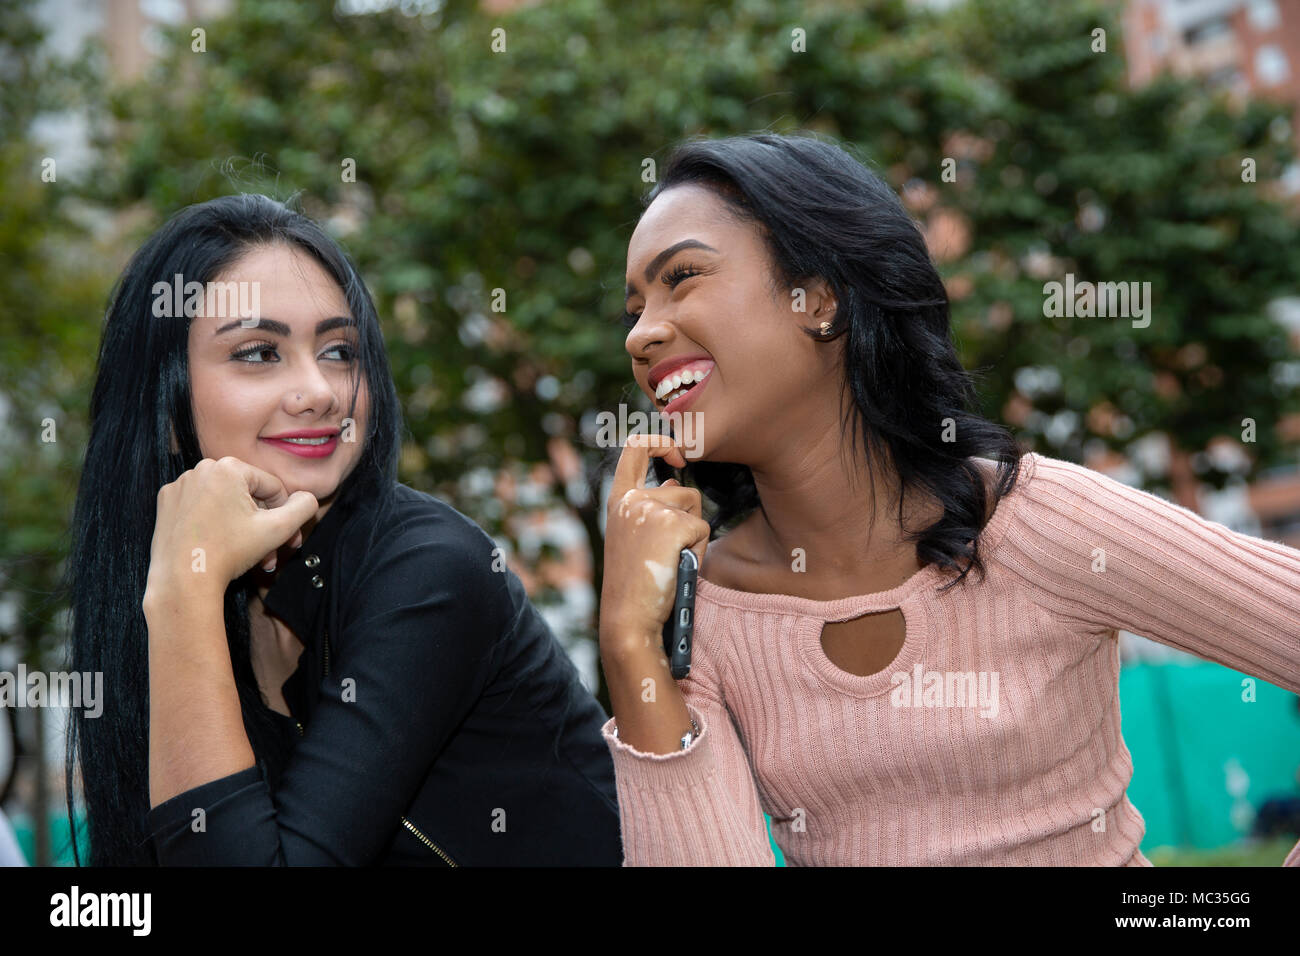 Young female friends smiling while looking at each other in park Stock Photo